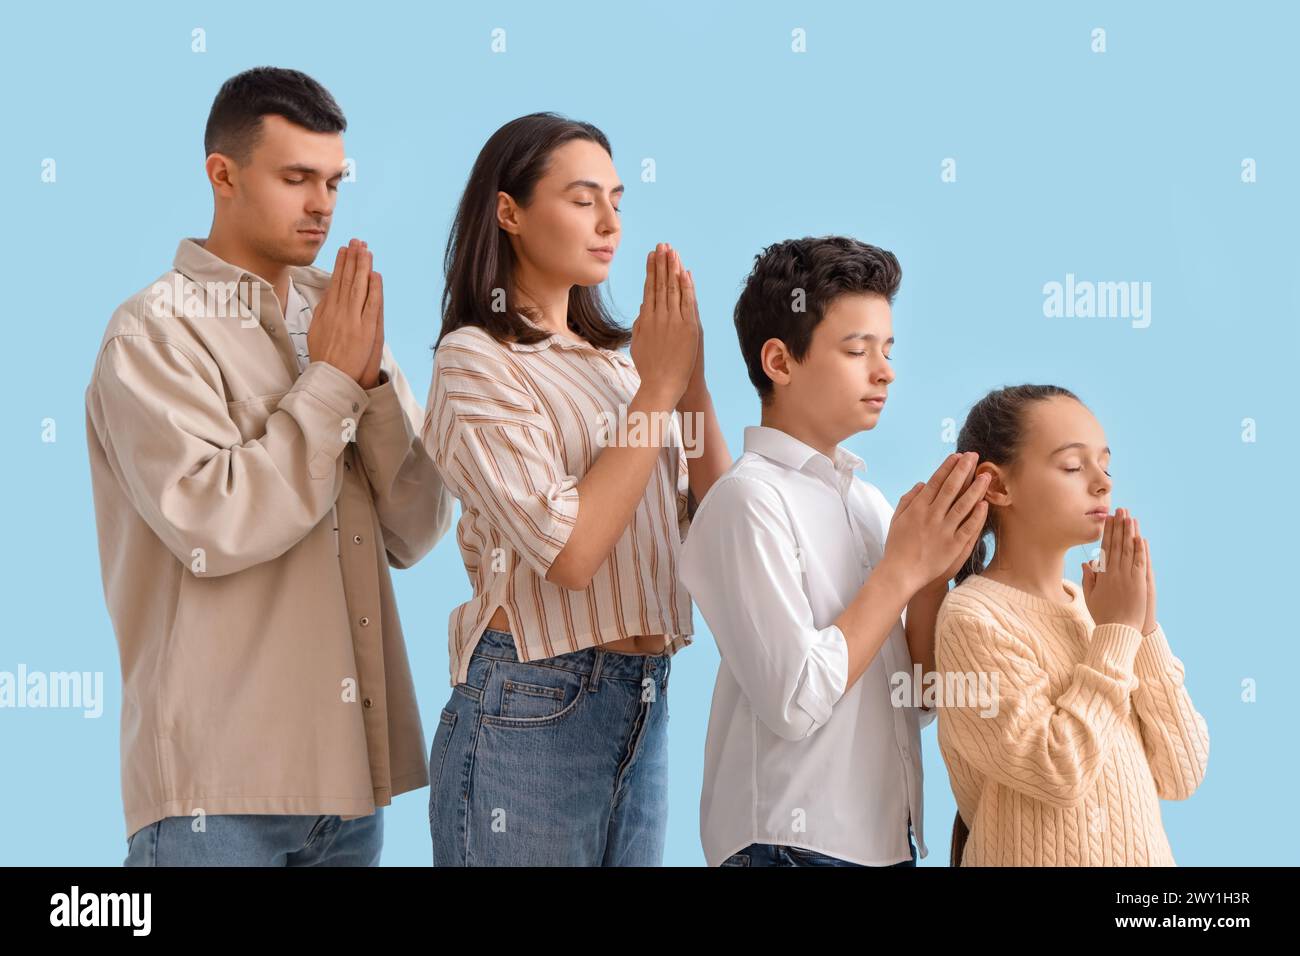 Family praying together on blue background Stock Photo